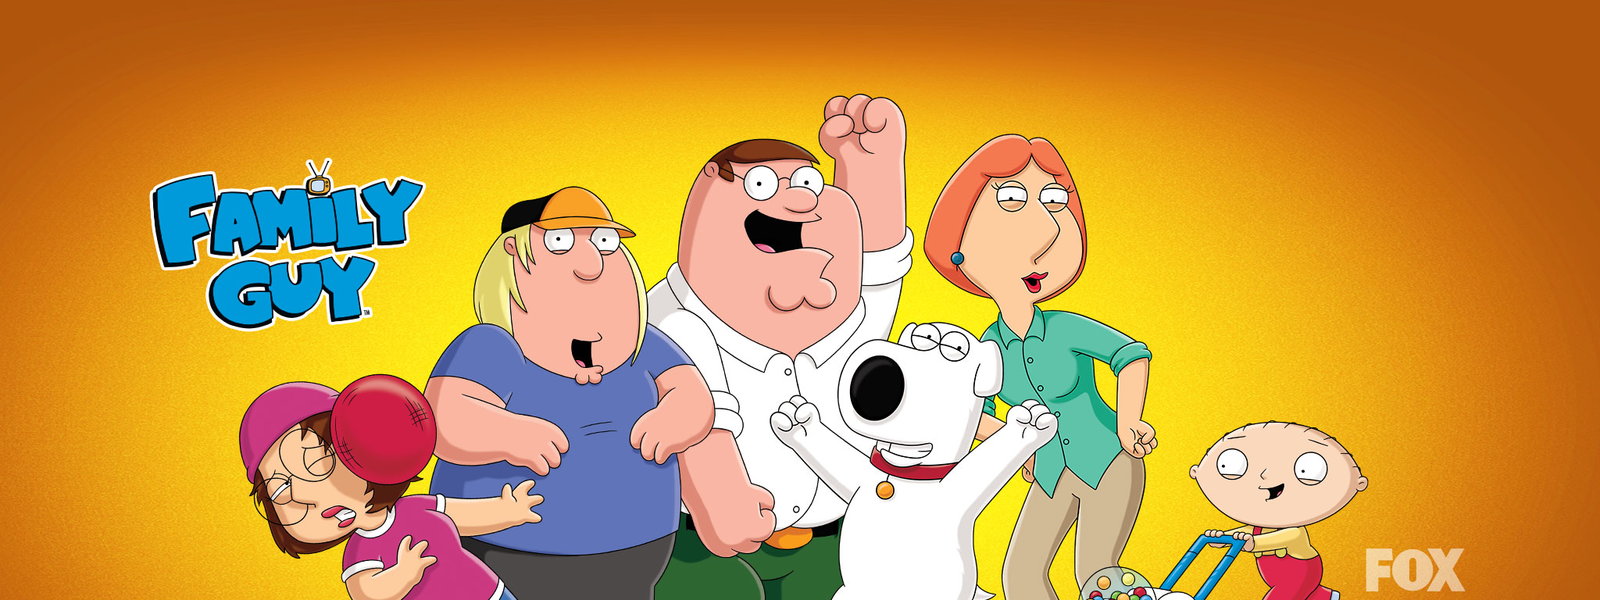 Family Guy the animated TV show